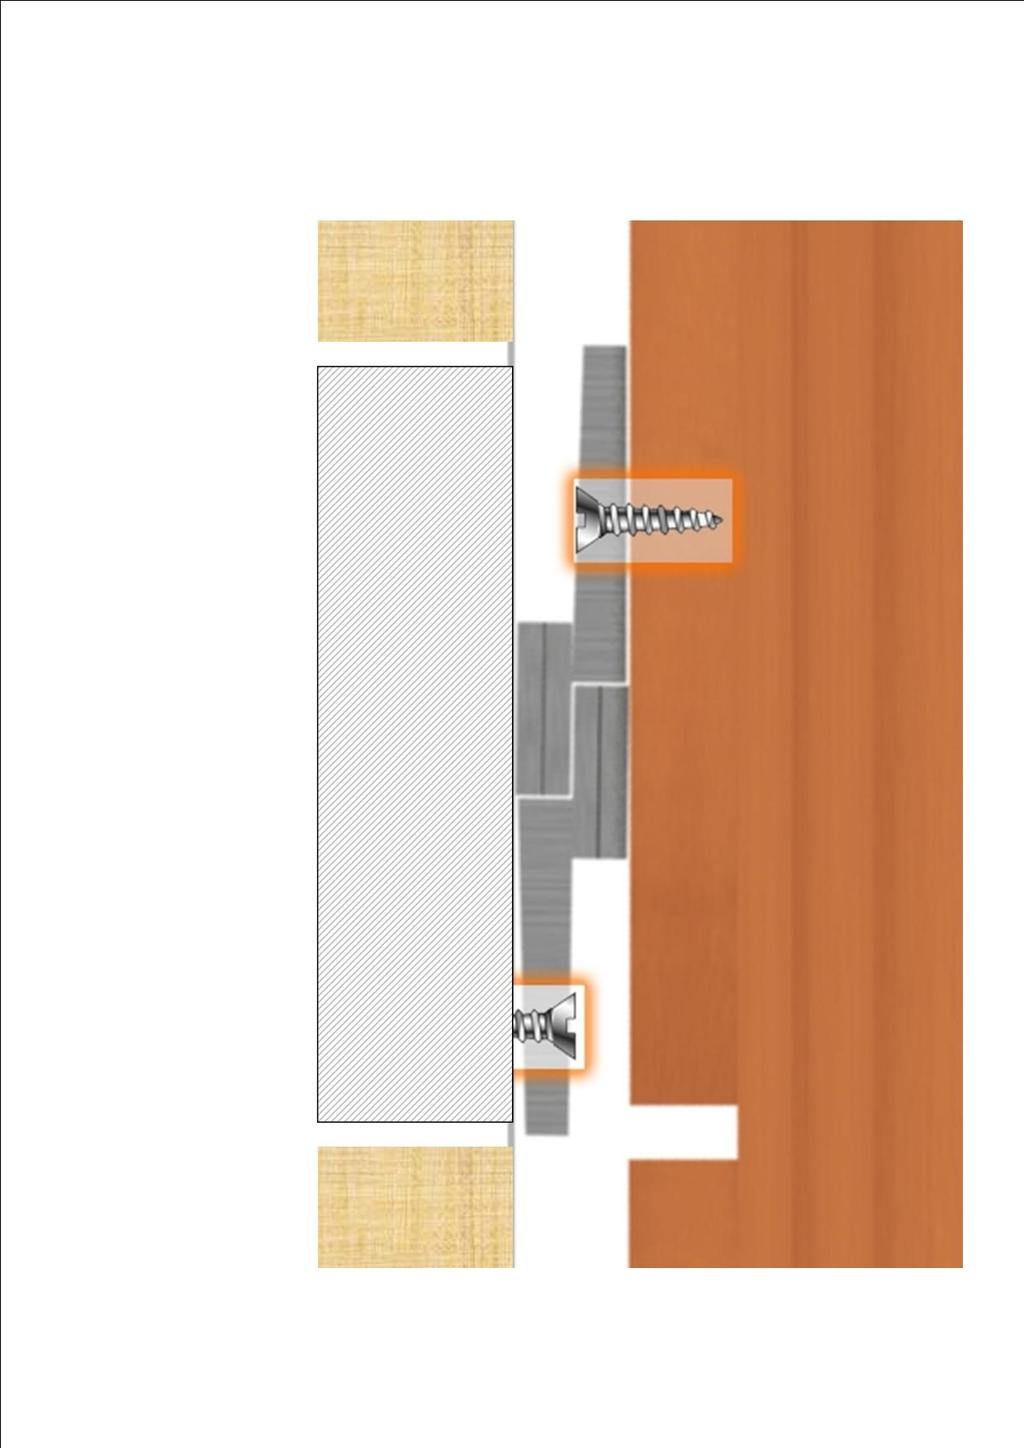 The split battens are then fixed in place to create an air space between the panels and the wall as shown in Fig. 1.